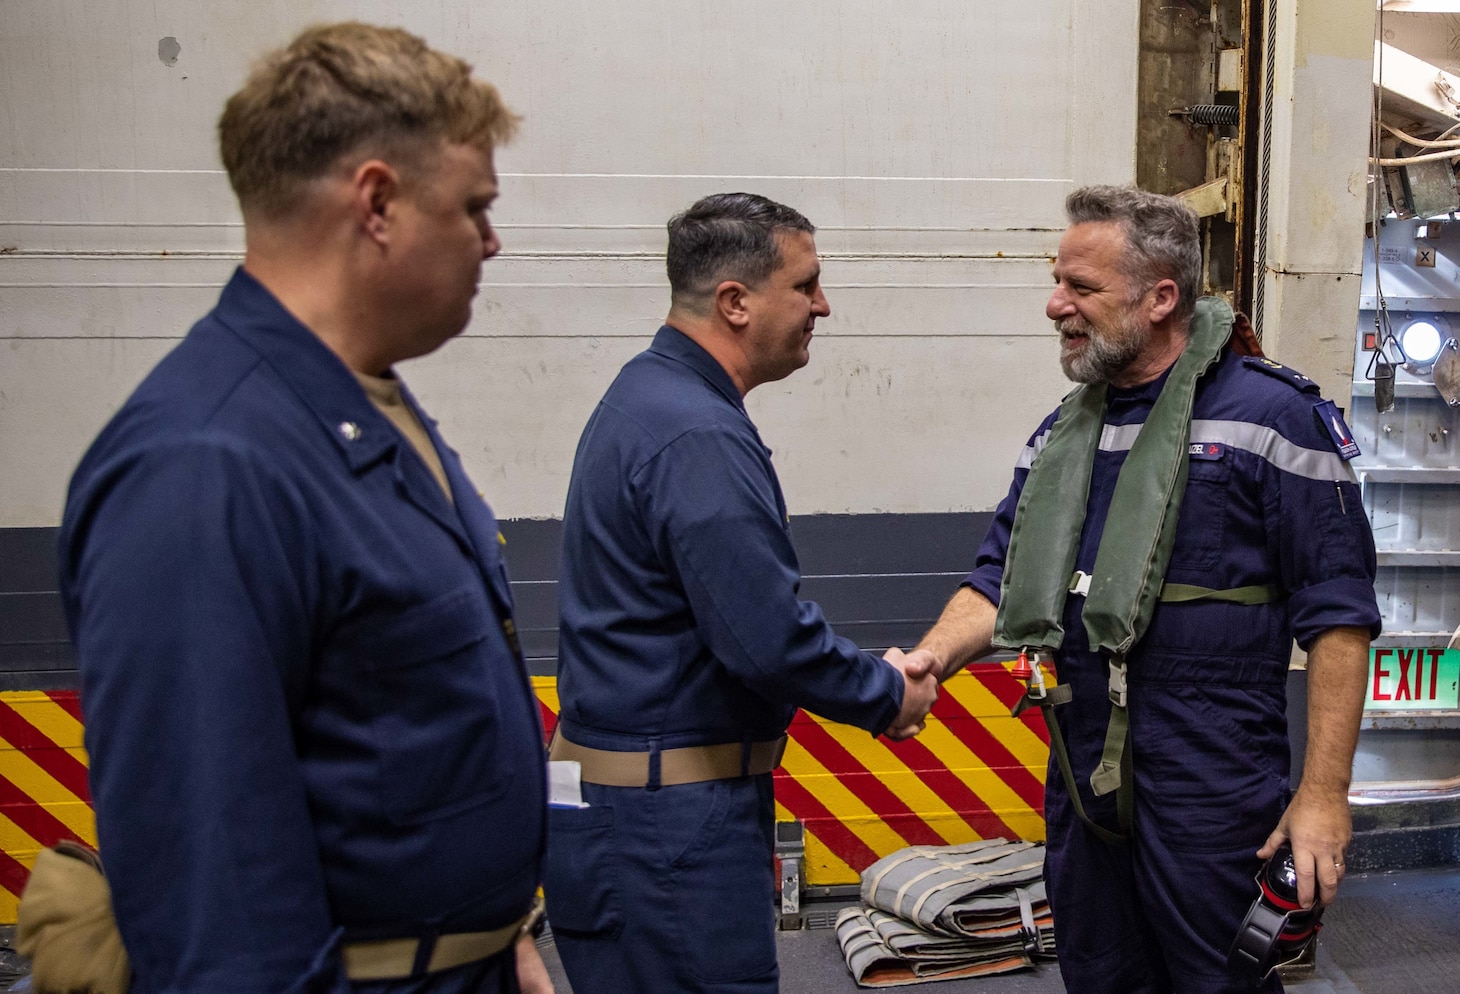 French Rear Adm. Christophe Cluzel, right, commander, French Carrier Strike Group (CSG), greets Cmdr. John Mastriani, middle, commanding officer of the Arleigh Burke-class guided-missile destroyer USS Roosevelt (DDG 80), and Cmdr. Jeffrey Chewning, left, executive officer of Roosevelt, during his visit of the ship, Nov. 27, 2022. Roosevelt, currently attached to the Charles de Gaulle CSG, is on a scheduled deployment in the U.S. Naval Forces Europe area of operations, employed by U.S. Sixth Fleet to defend U.S., allied and partner interests.